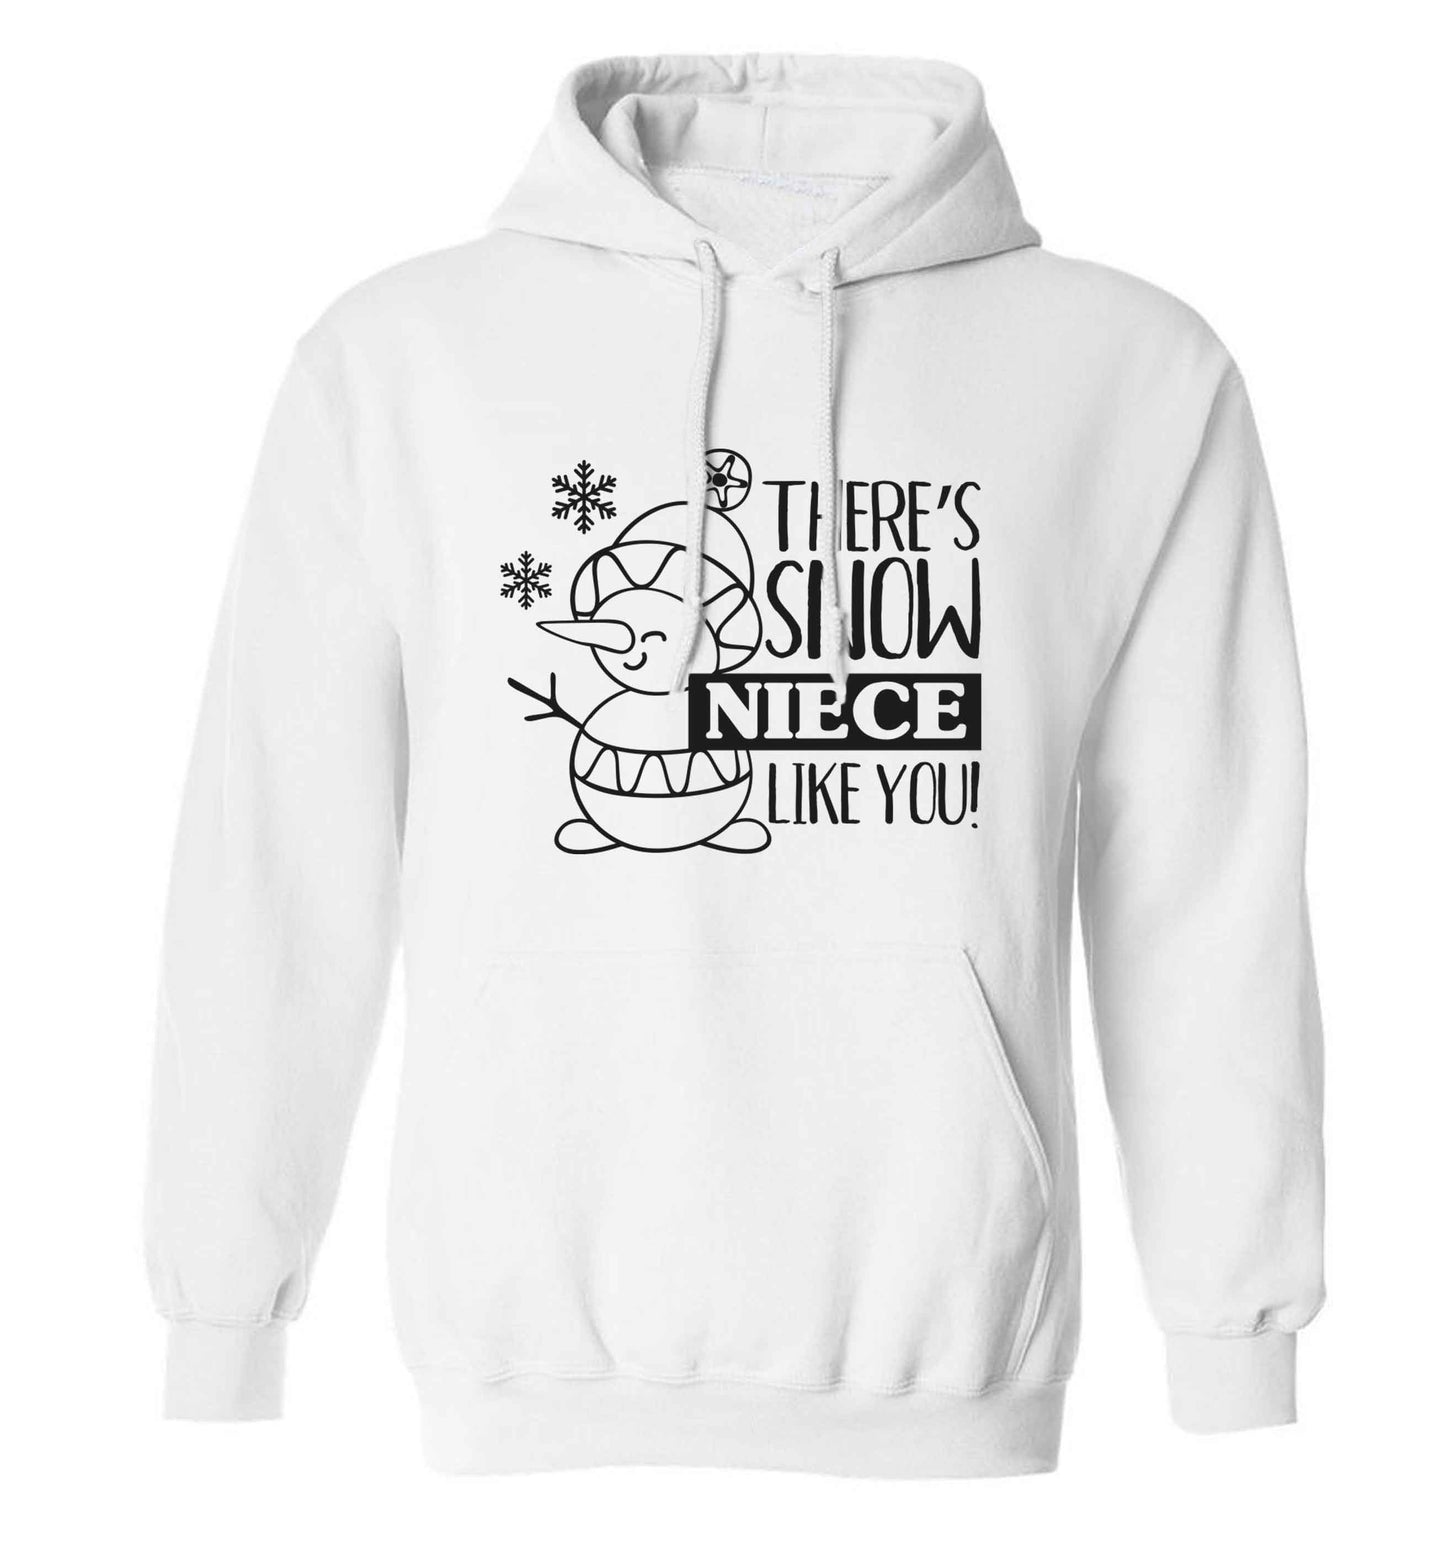 There's snow niece like you adults unisex white hoodie 2XL